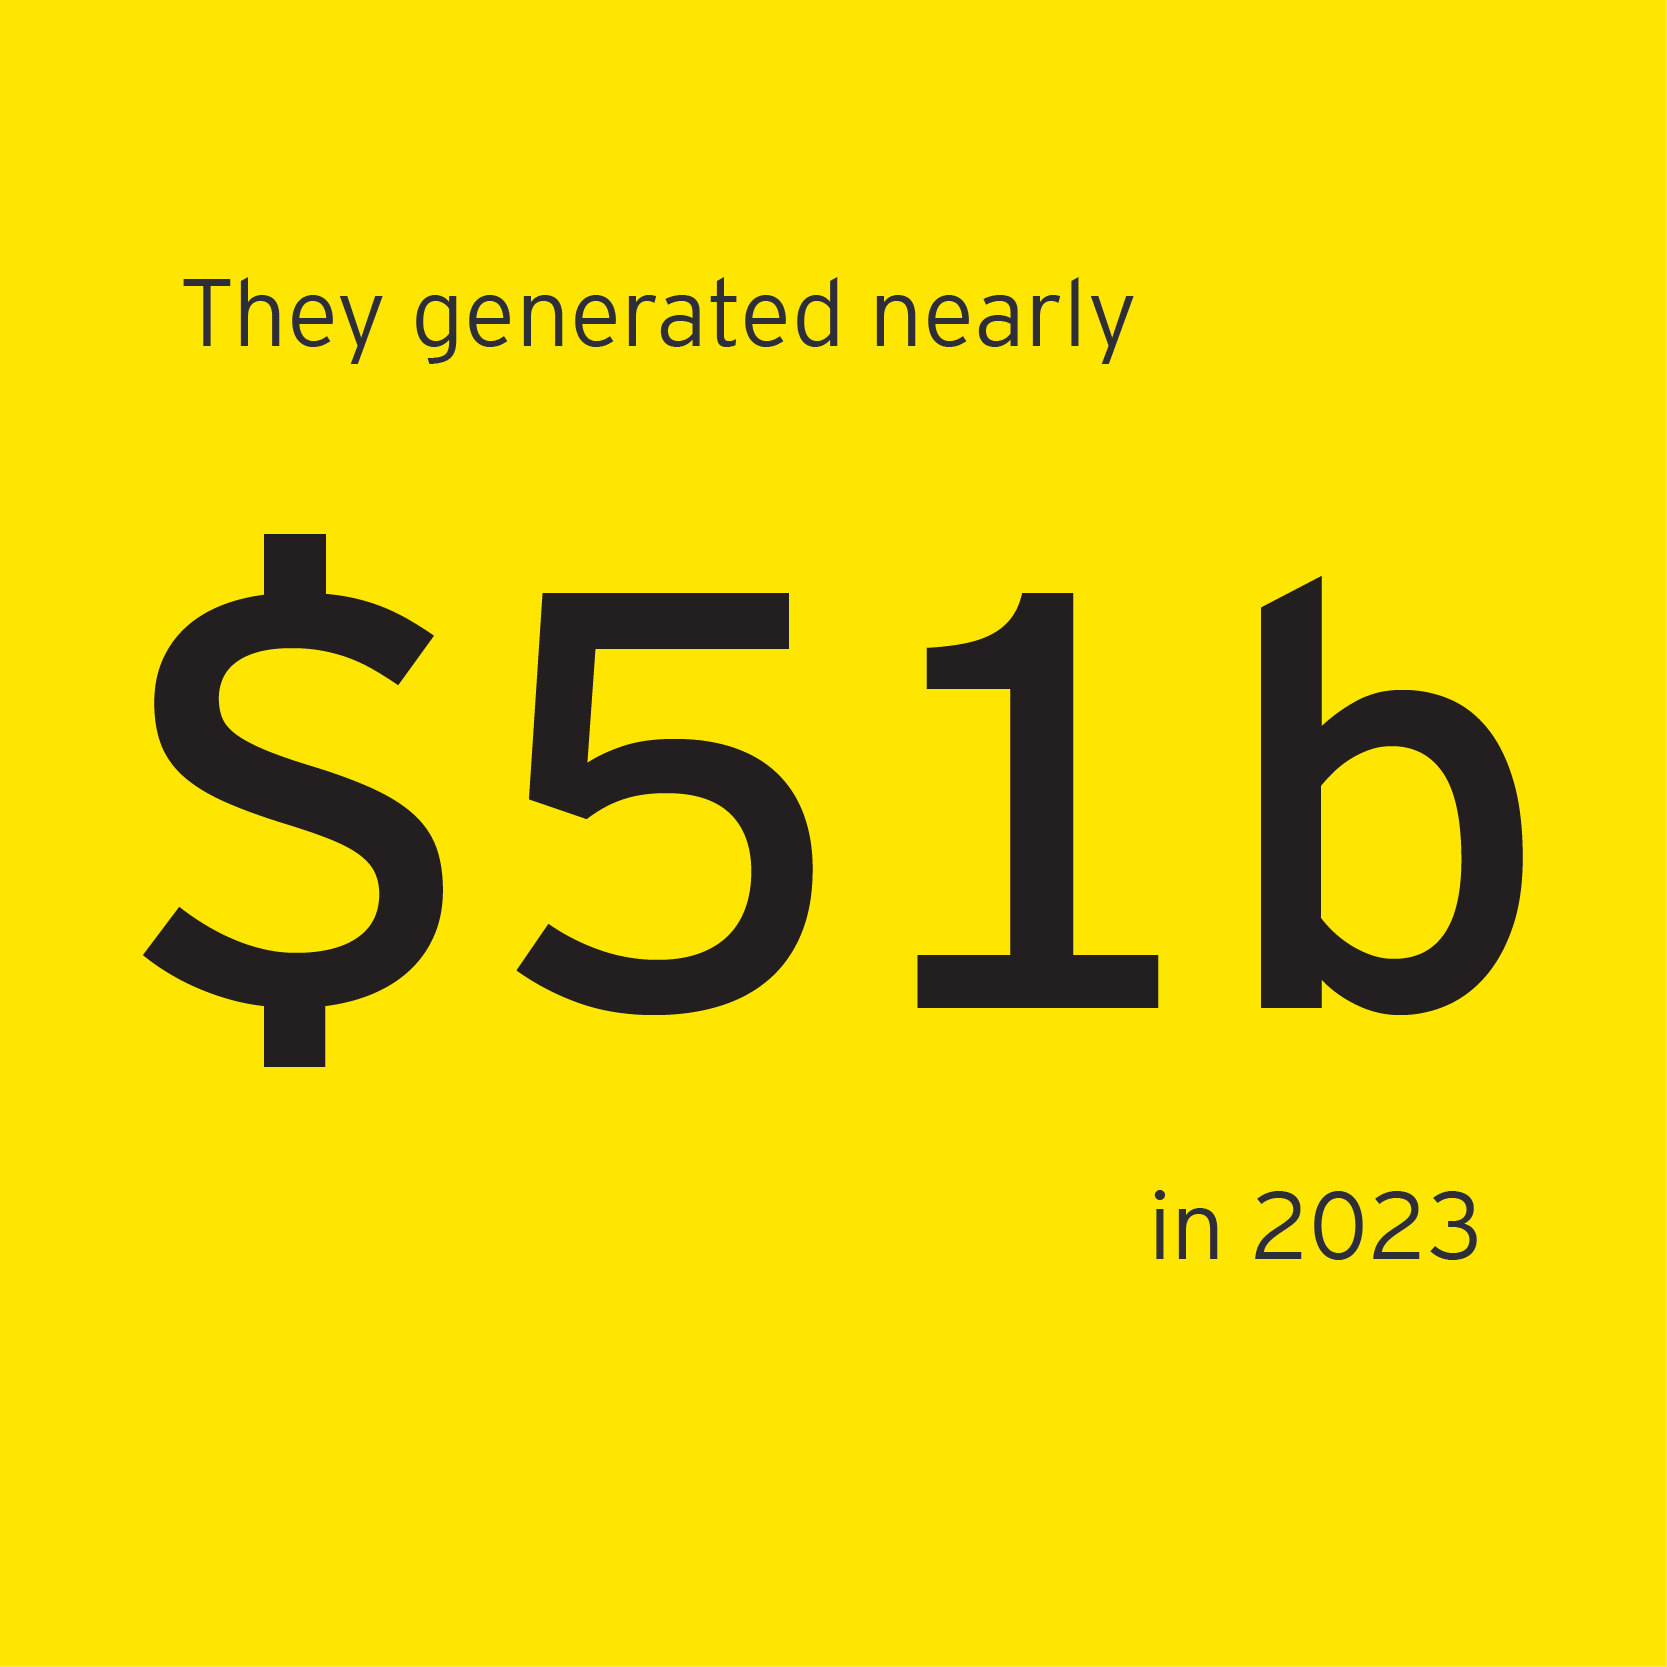 They generated nearly $51b in 2023